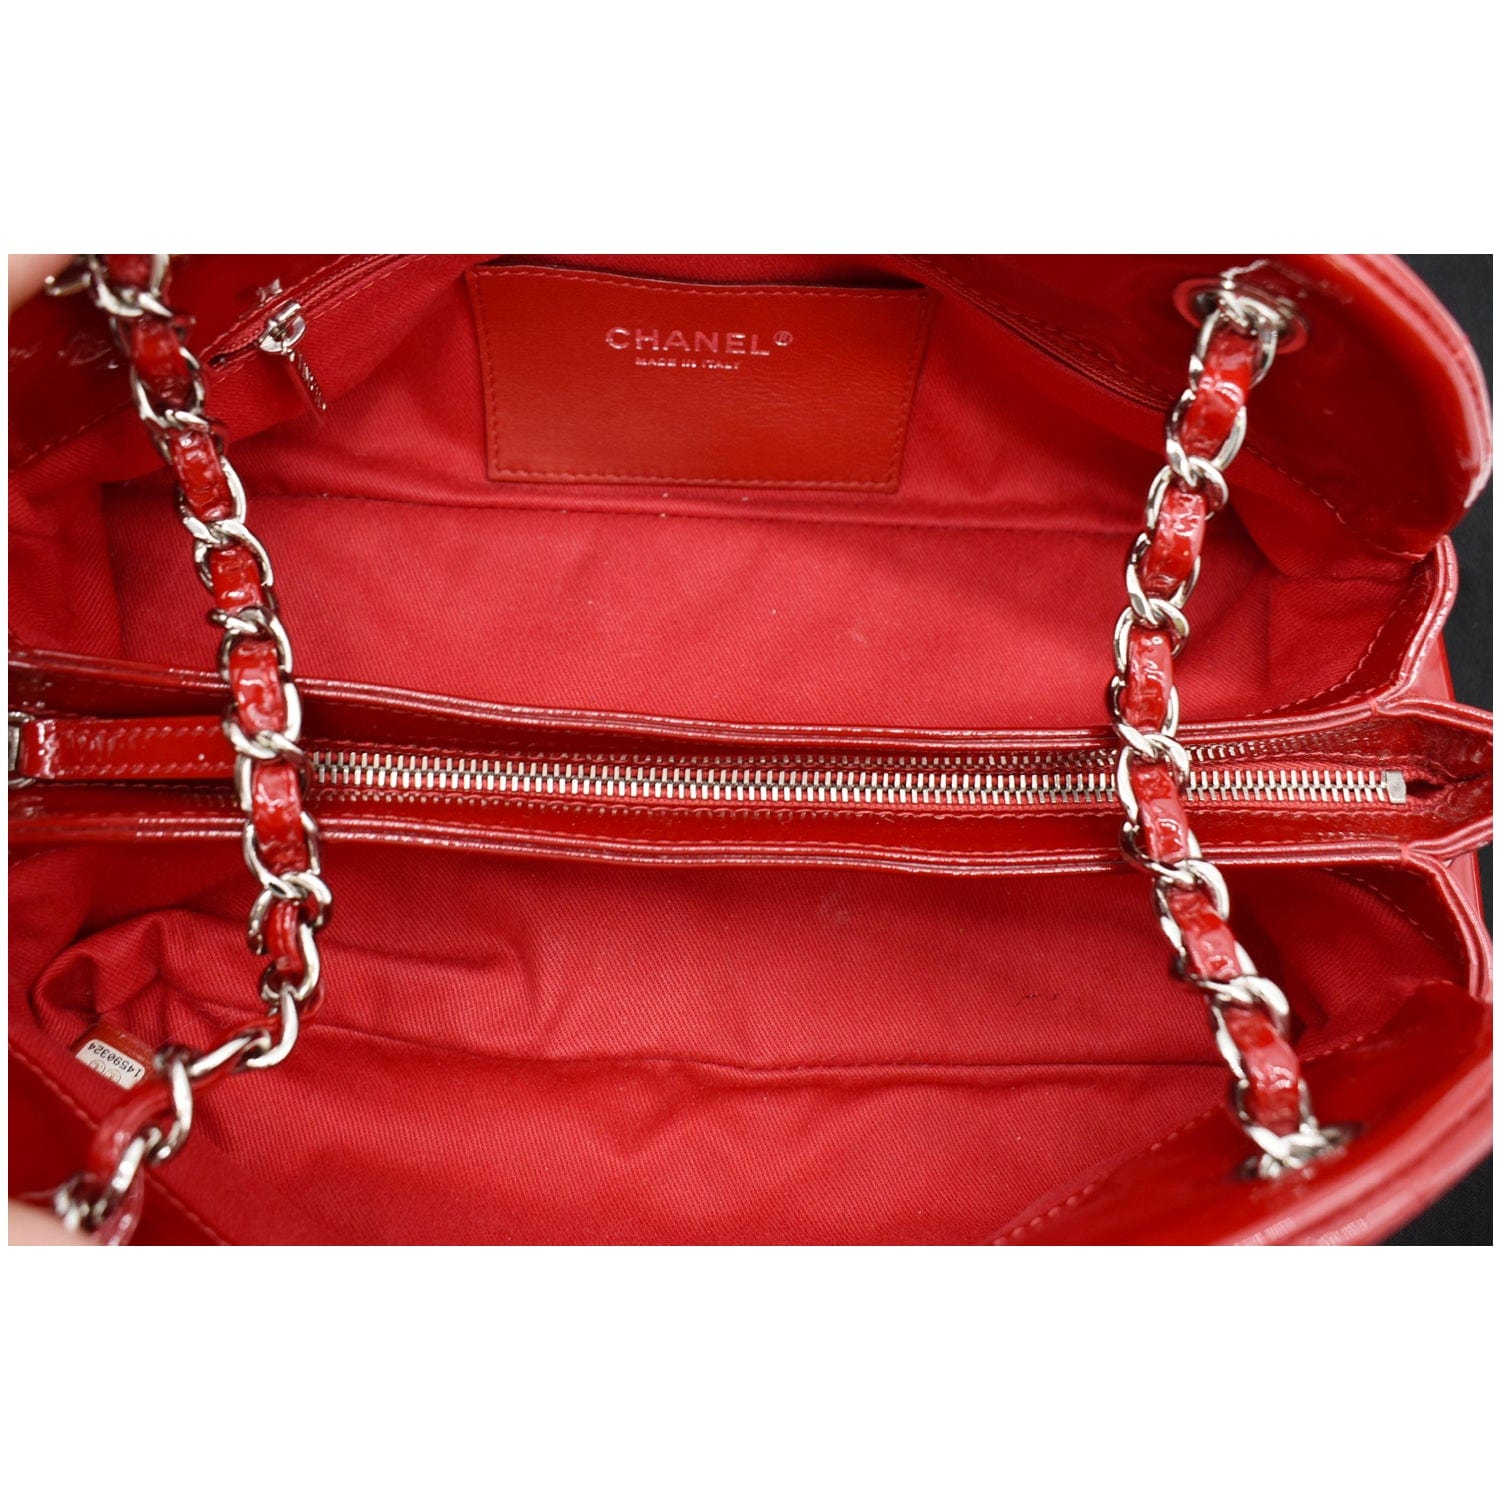 Mademoiselle patent leather clutch bag